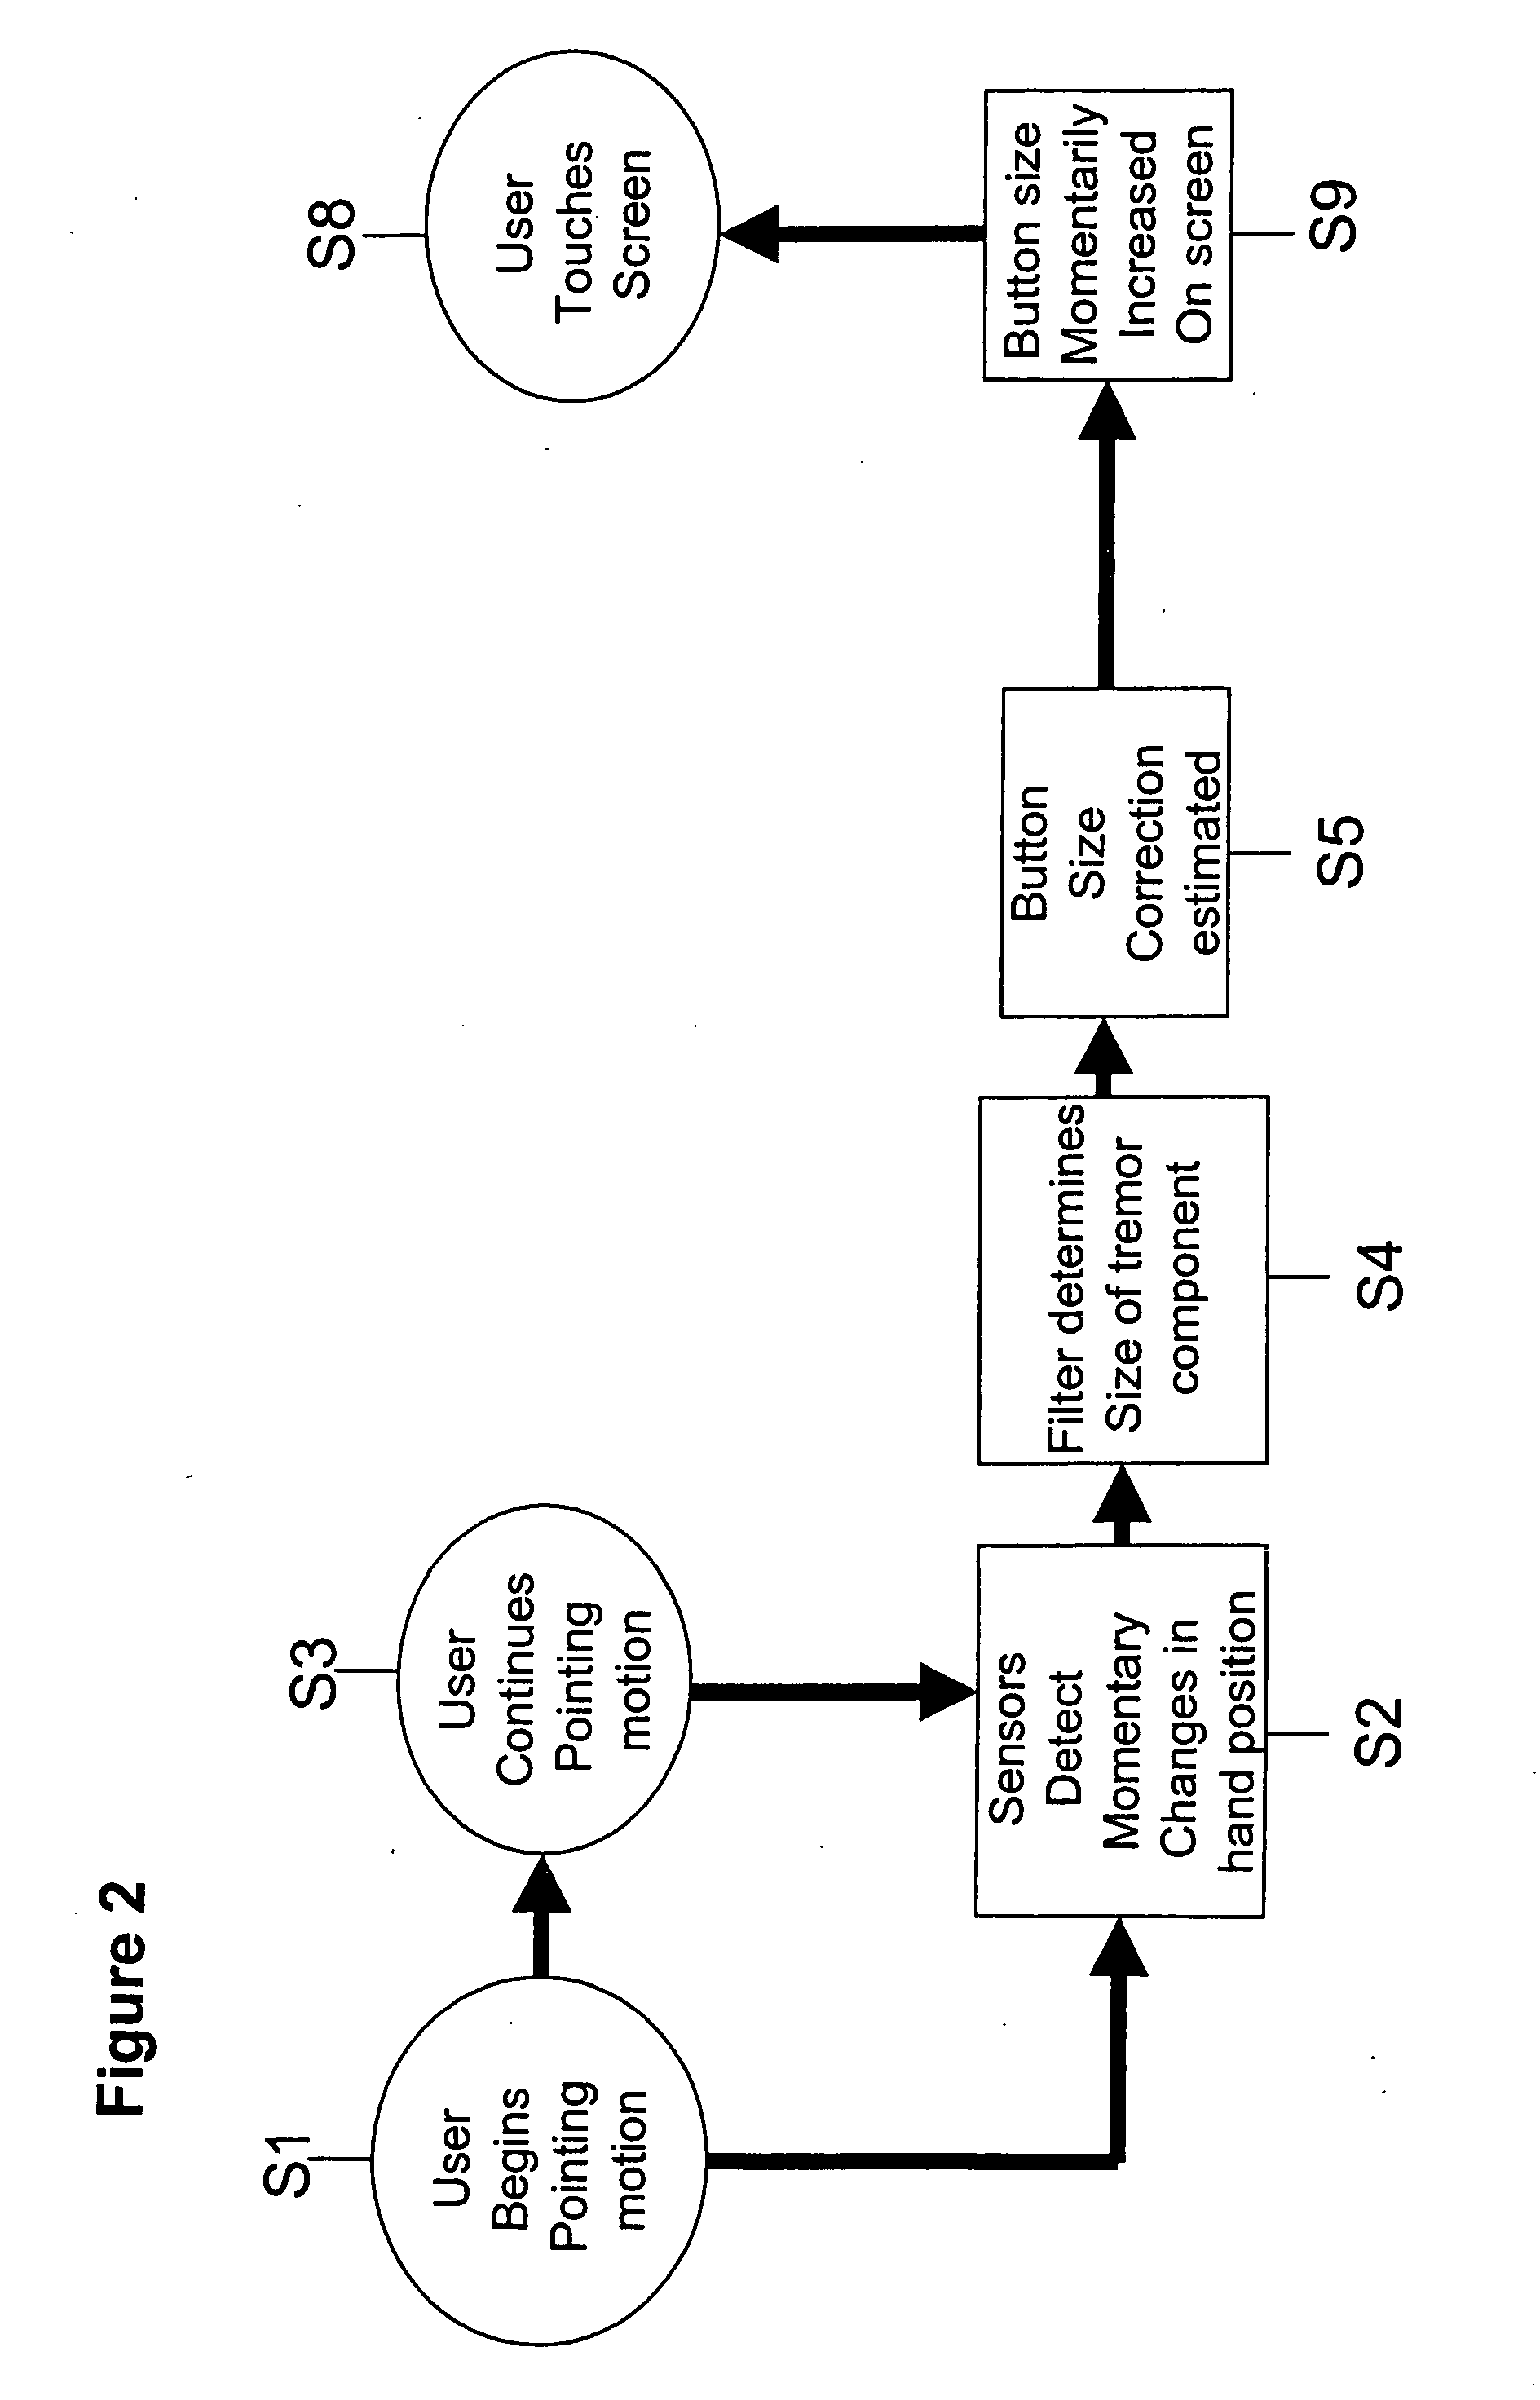 Method for dynamically adapting button size on touch screens to compensate for hand tremor